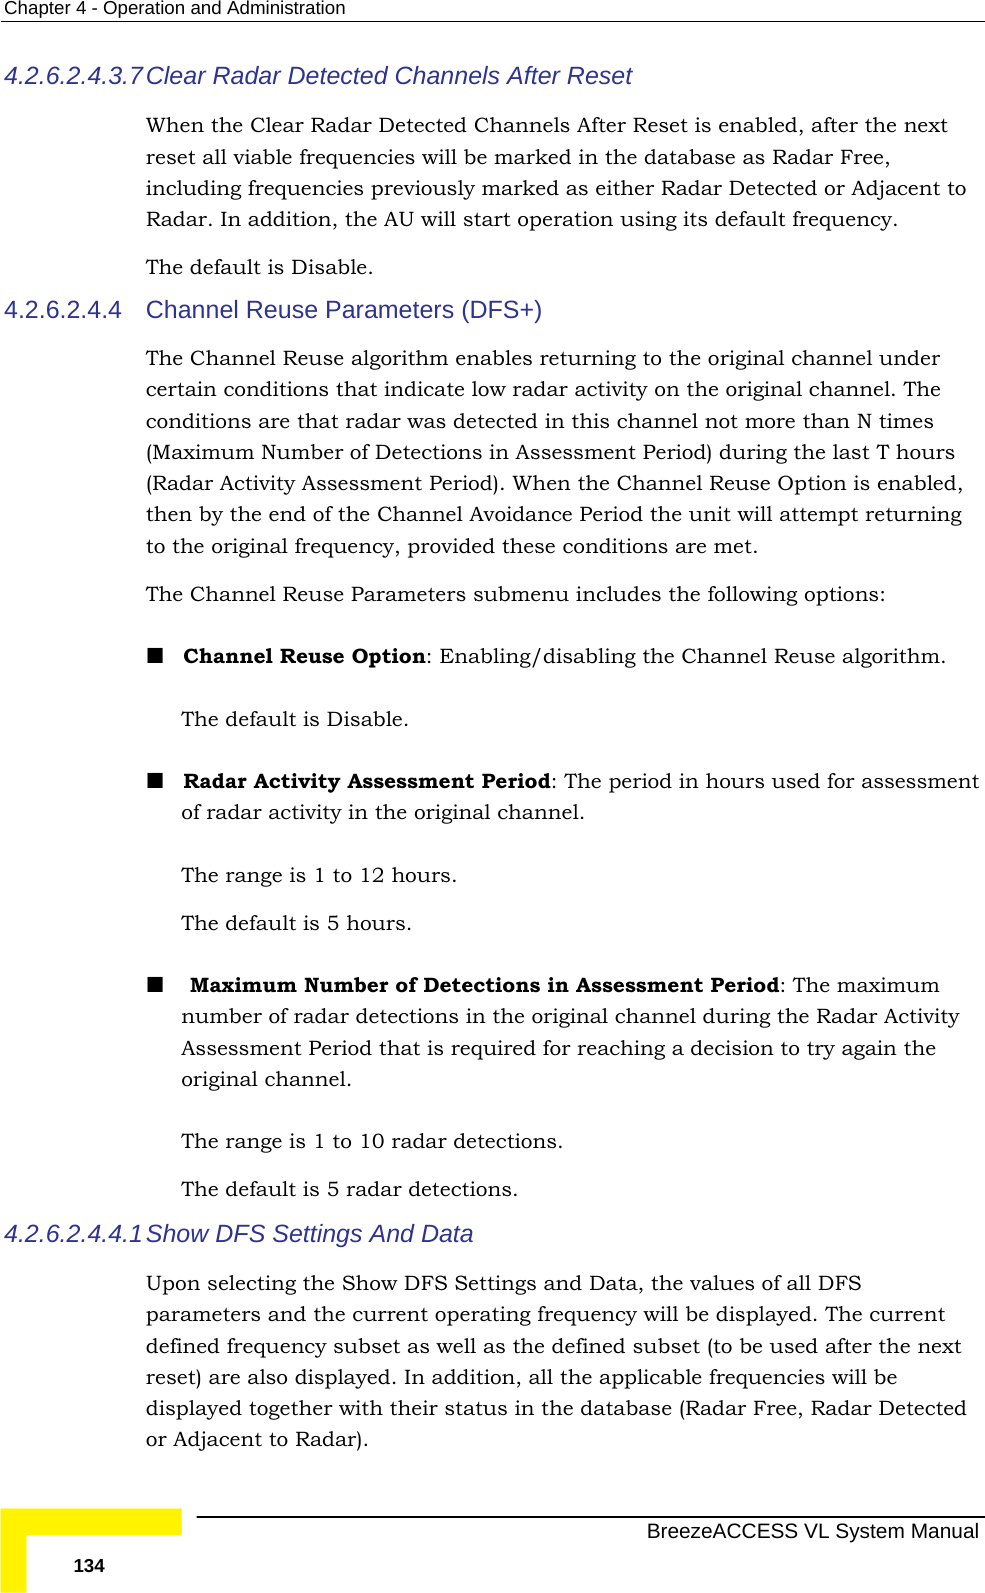 Chapter  4 - Operation and Administration   BreezeACCESS VL System Manual 134 4.2.6.2.4.3.7 Clear Radar Detected Channels After Reset When the Clear Radar Detected Channels After Reset is enabled, after the next reset all viable frequencies will be marked in the database as Radar Free, including frequencies previously marked as either Radar Detected or Adjacent to Radar. In addition, the AU will start operation using its default frequency. The default is Disable. 4.2.6.2.4.4  Channel Reuse Parameters (DFS+) The Channel Reuse algorithm enables returning to the original channel under certain conditions that indicate low radar activity on the original channel. The conditions are that radar was detected in this channel not more than N times (Maximum Number of Detections in Assessment Period) during the last T hours (Radar Activity Assessment Period). When the Channel Reuse Option is enabled, then by the end of the Channel Avoidance Period the unit will attempt returning to the original frequency, provided these conditions are met. The Channel Reuse Parameters submenu includes the following options:  Channel Reuse Option: Enabling/disabling the Channel Reuse algorithm. The default is Disable.  Radar Activity Assessment Period: The period in hours used for assessment of radar activity in the original channel. The range is 1 to 12 hours. The default is 5 hours.    Maximum Number of Detections in Assessment Period: The maximum number of radar detections in the original channel during the Radar Activity Assessment Period that is required for reaching a decision to try again the original channel. The range is 1 to 10 radar detections. The default is 5 radar detections.  4.2.6.2.4.4.1 Show DFS Settings And Data Upon selecting the Show DFS Settings and Data, the values of all DFS parameters and the current operating frequency will be displayed. The current defined frequency subset as well as the defined subset (to be used after the next reset) are also displayed. In addition, all the applicable frequencies will be displayed together with their status in the database (Radar Free, Radar Detected or Adjacent to Radar). 